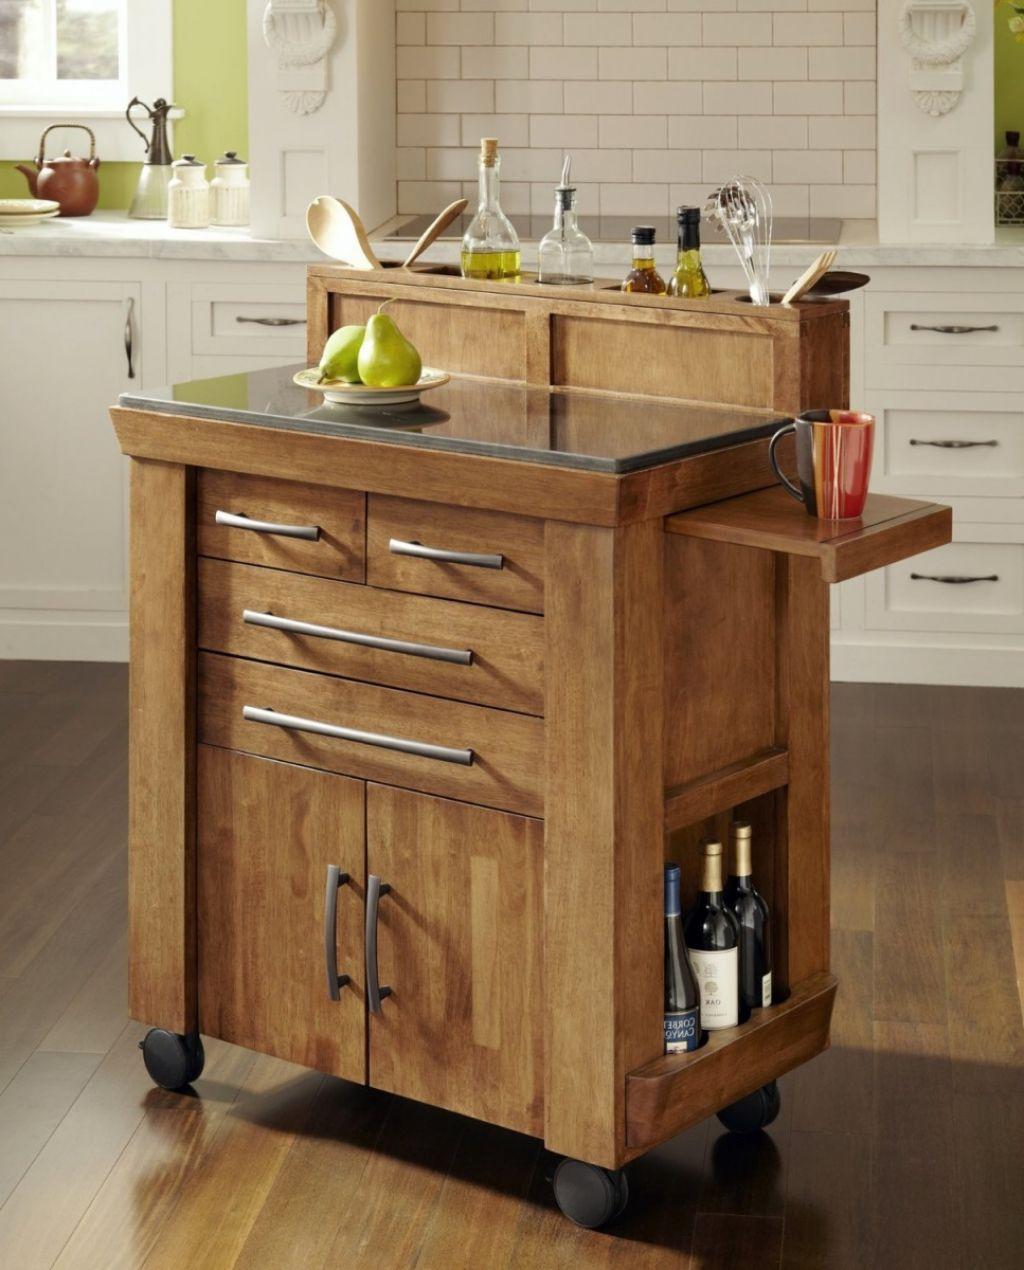 Small Mobile Kitchen Island Beautiful The Best Portable Kitchen Island With Seating Midcityeast Of Small Mobile Kitchen Island 